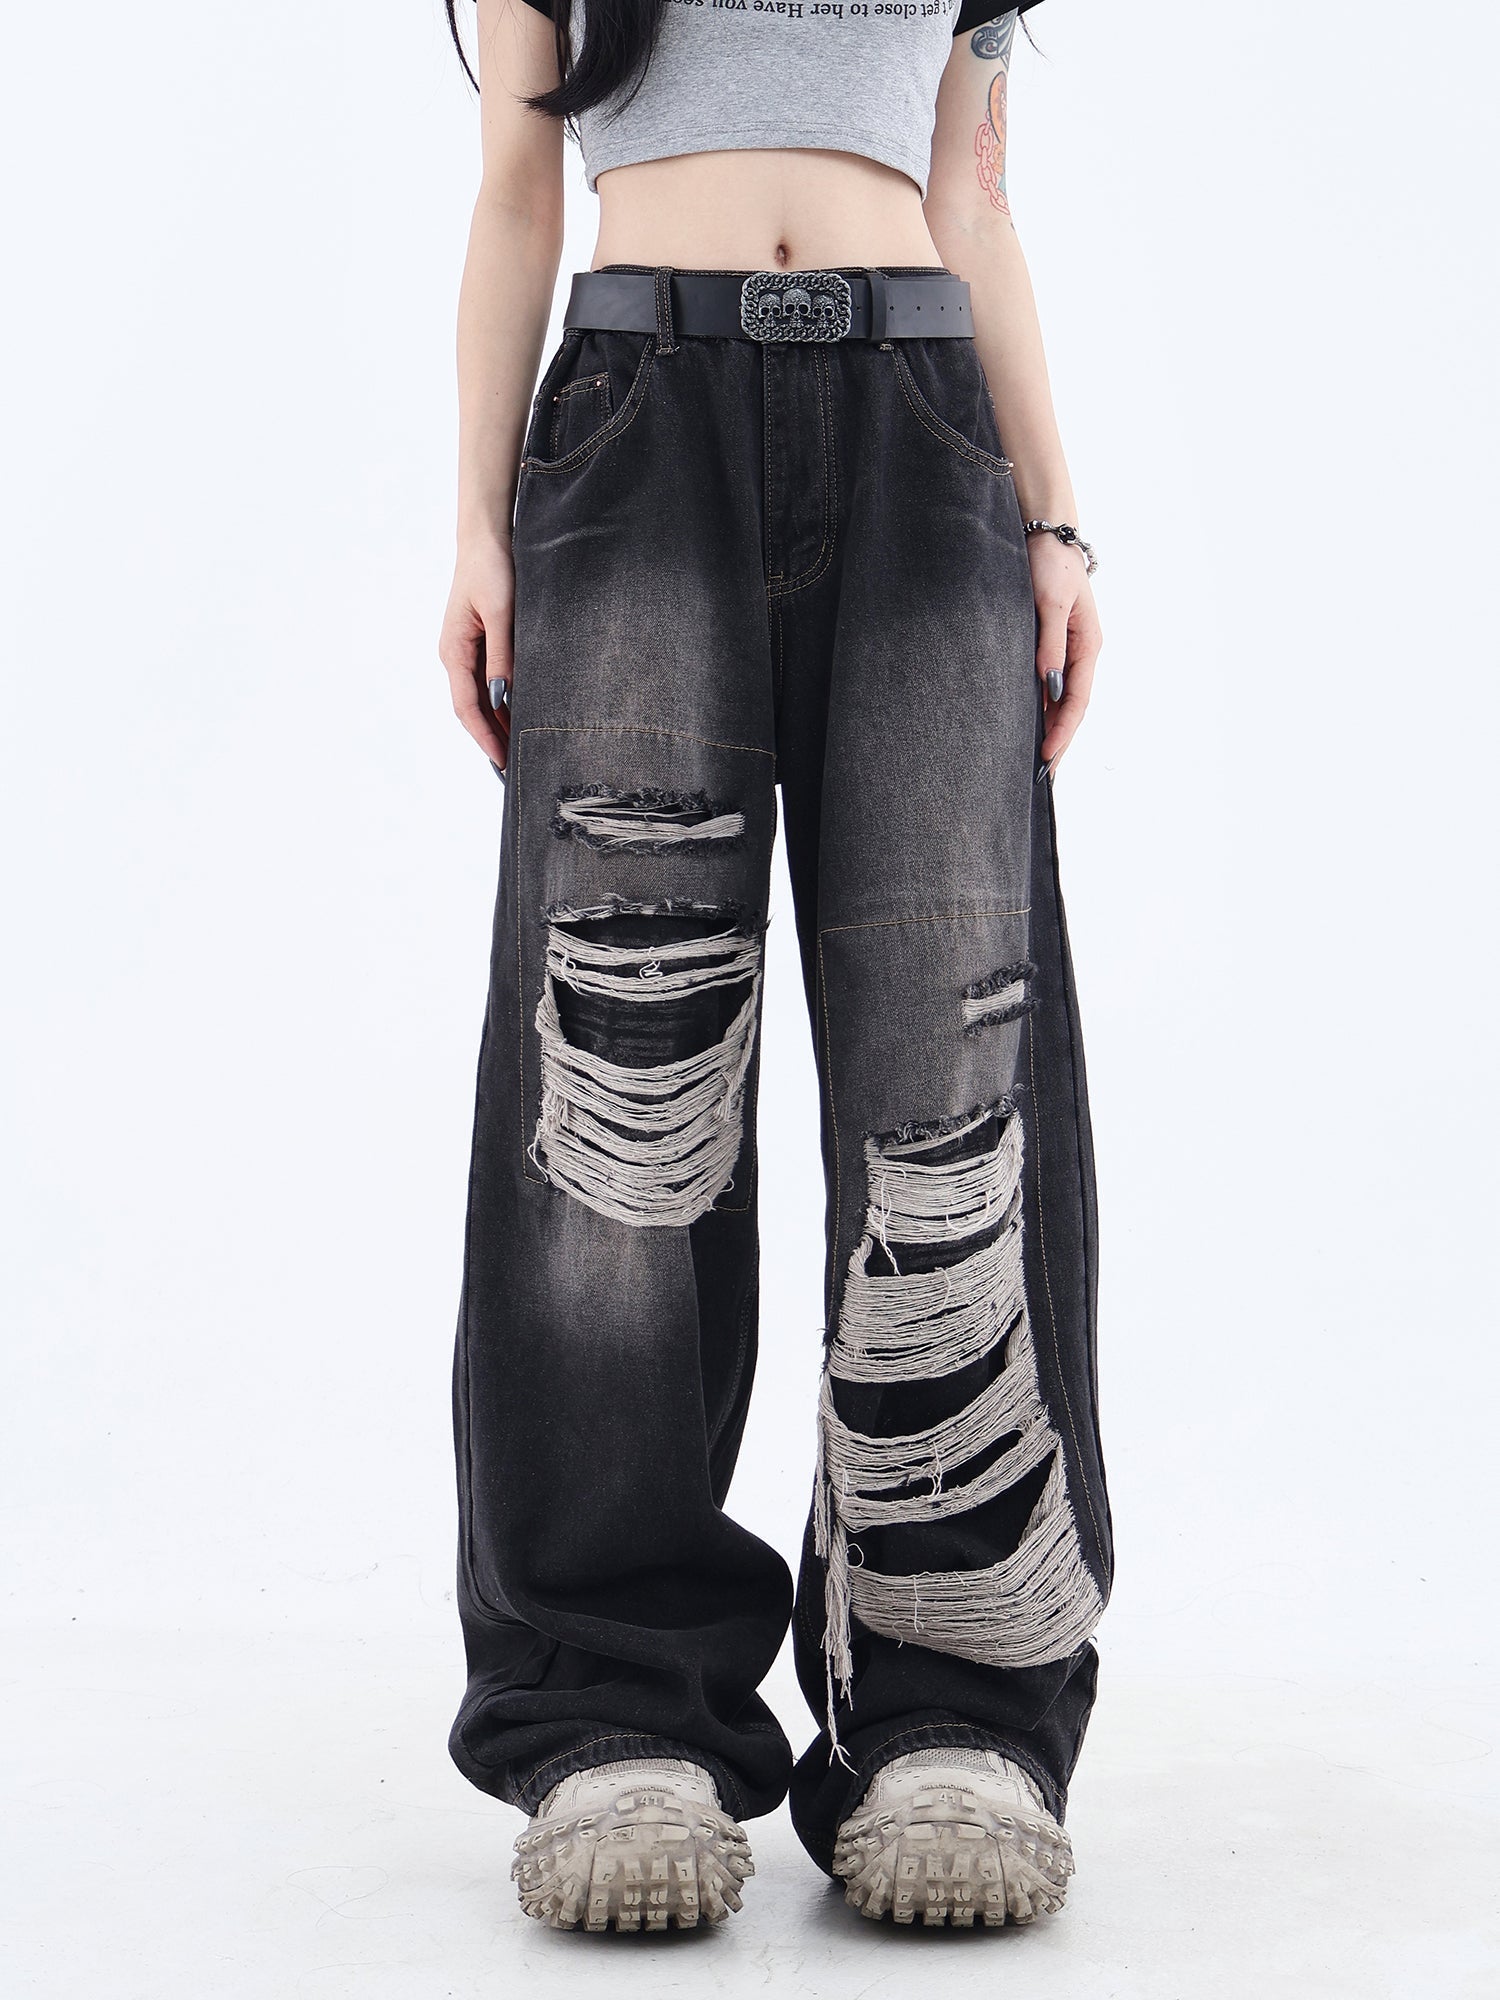 Distressed Patched Denim Jeans - chiclara